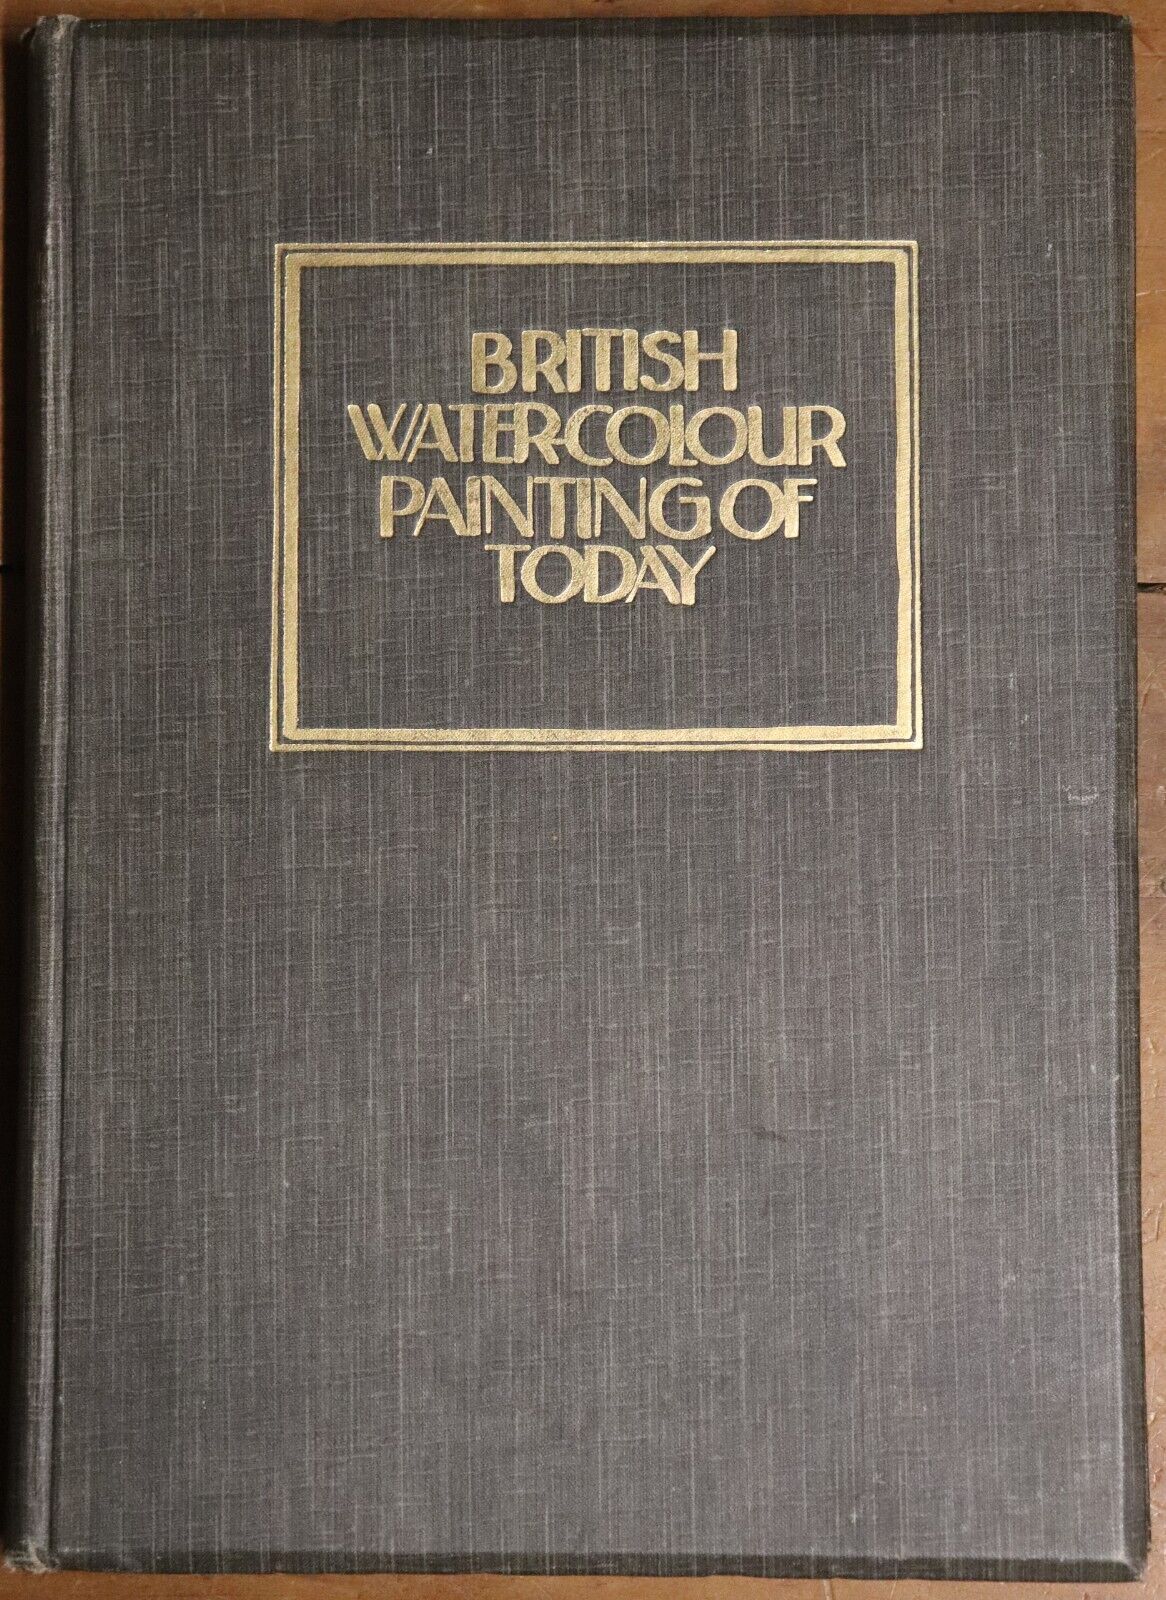 British Water-Colour Painting Of Today - 1921 - Antique Art Book